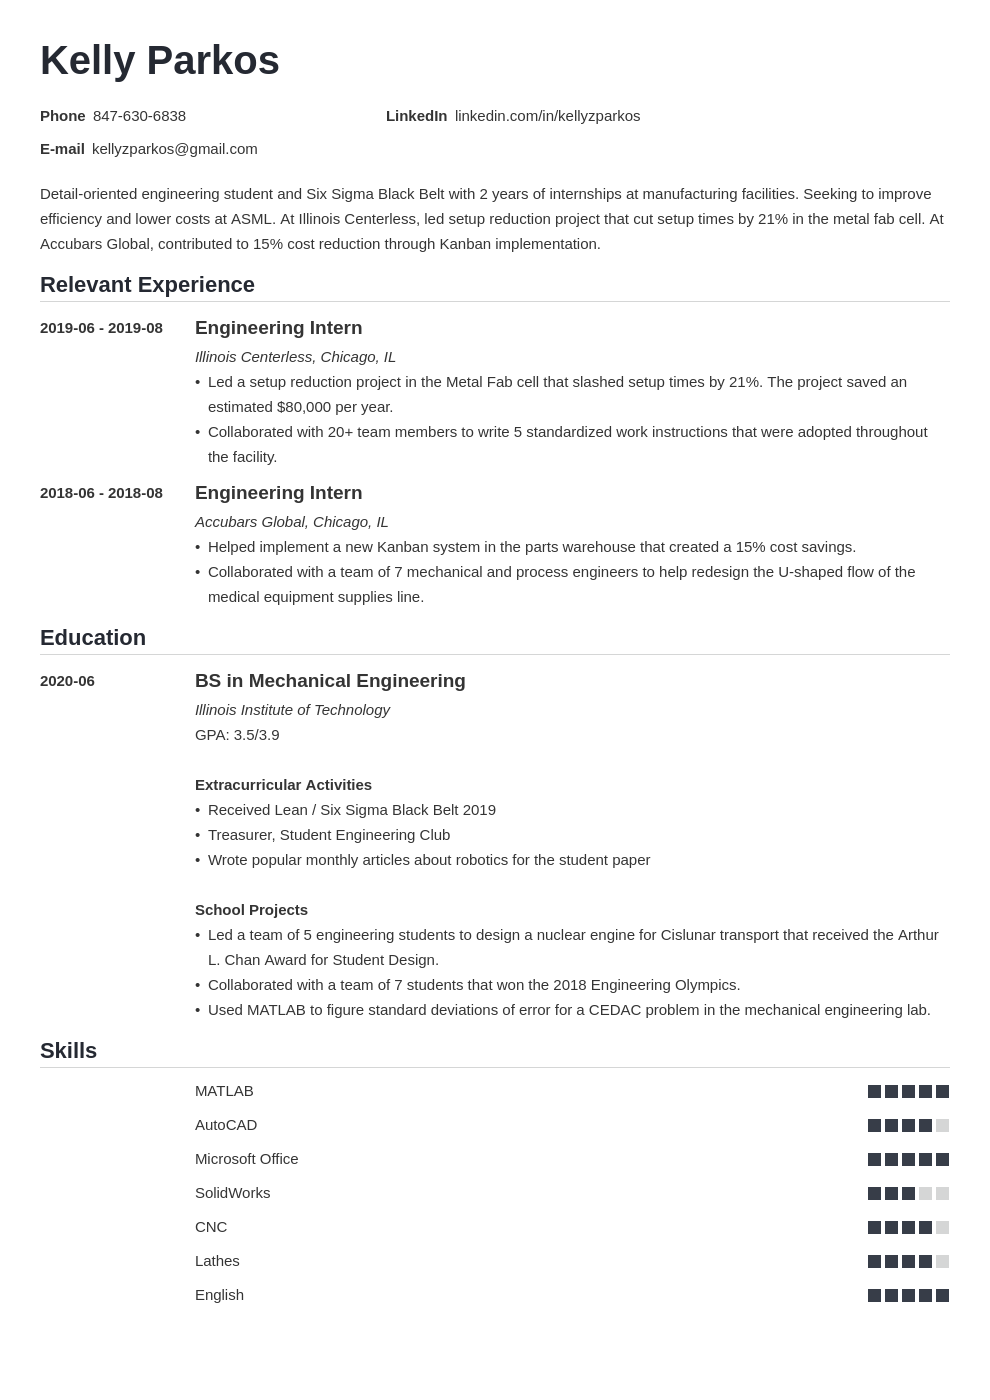 resume template for engineering students freshers